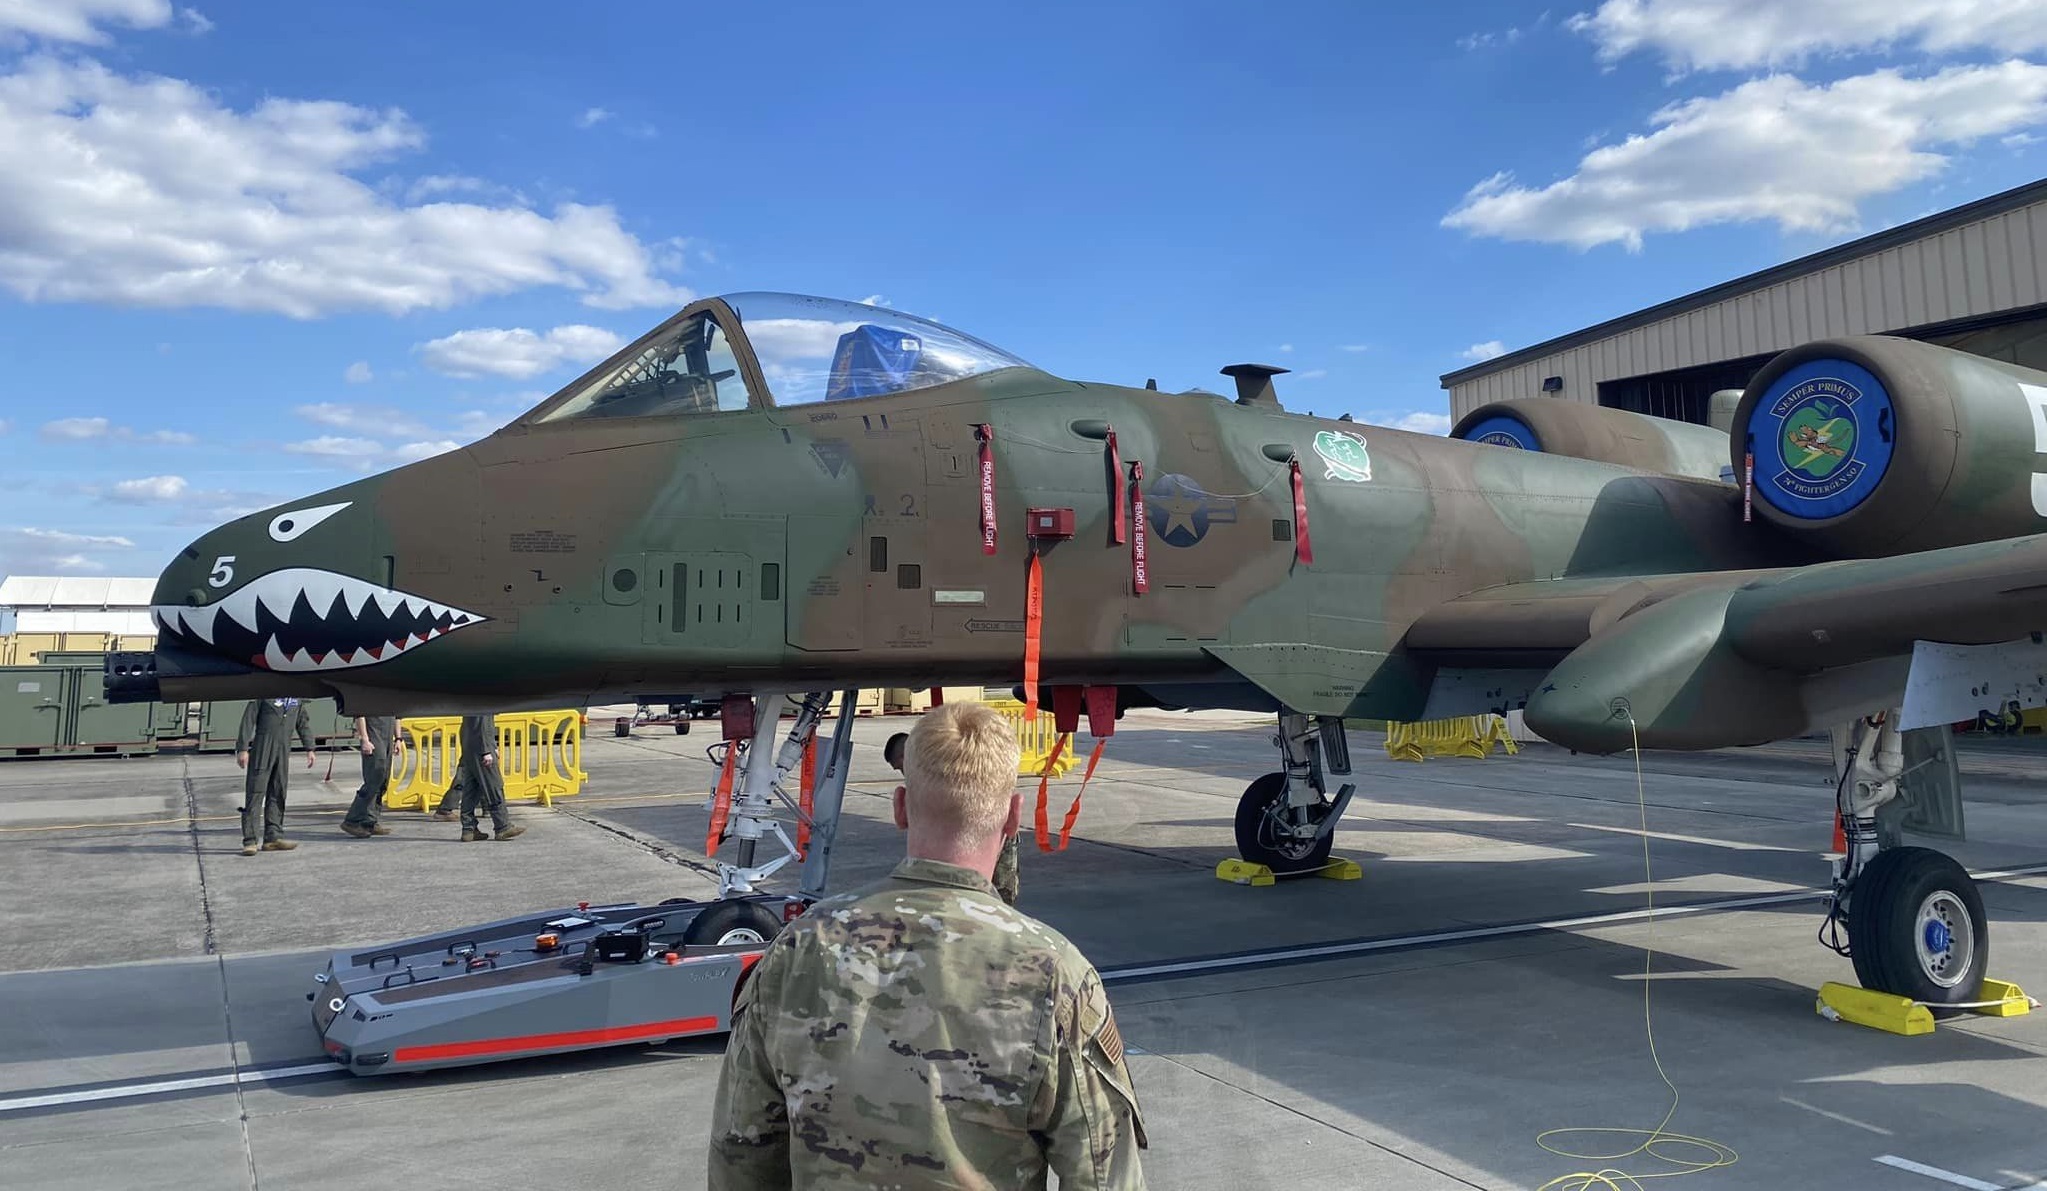 US Air Force shows A-10 Thunderbolt II in historic World War II-era Flying Tigers camouflage